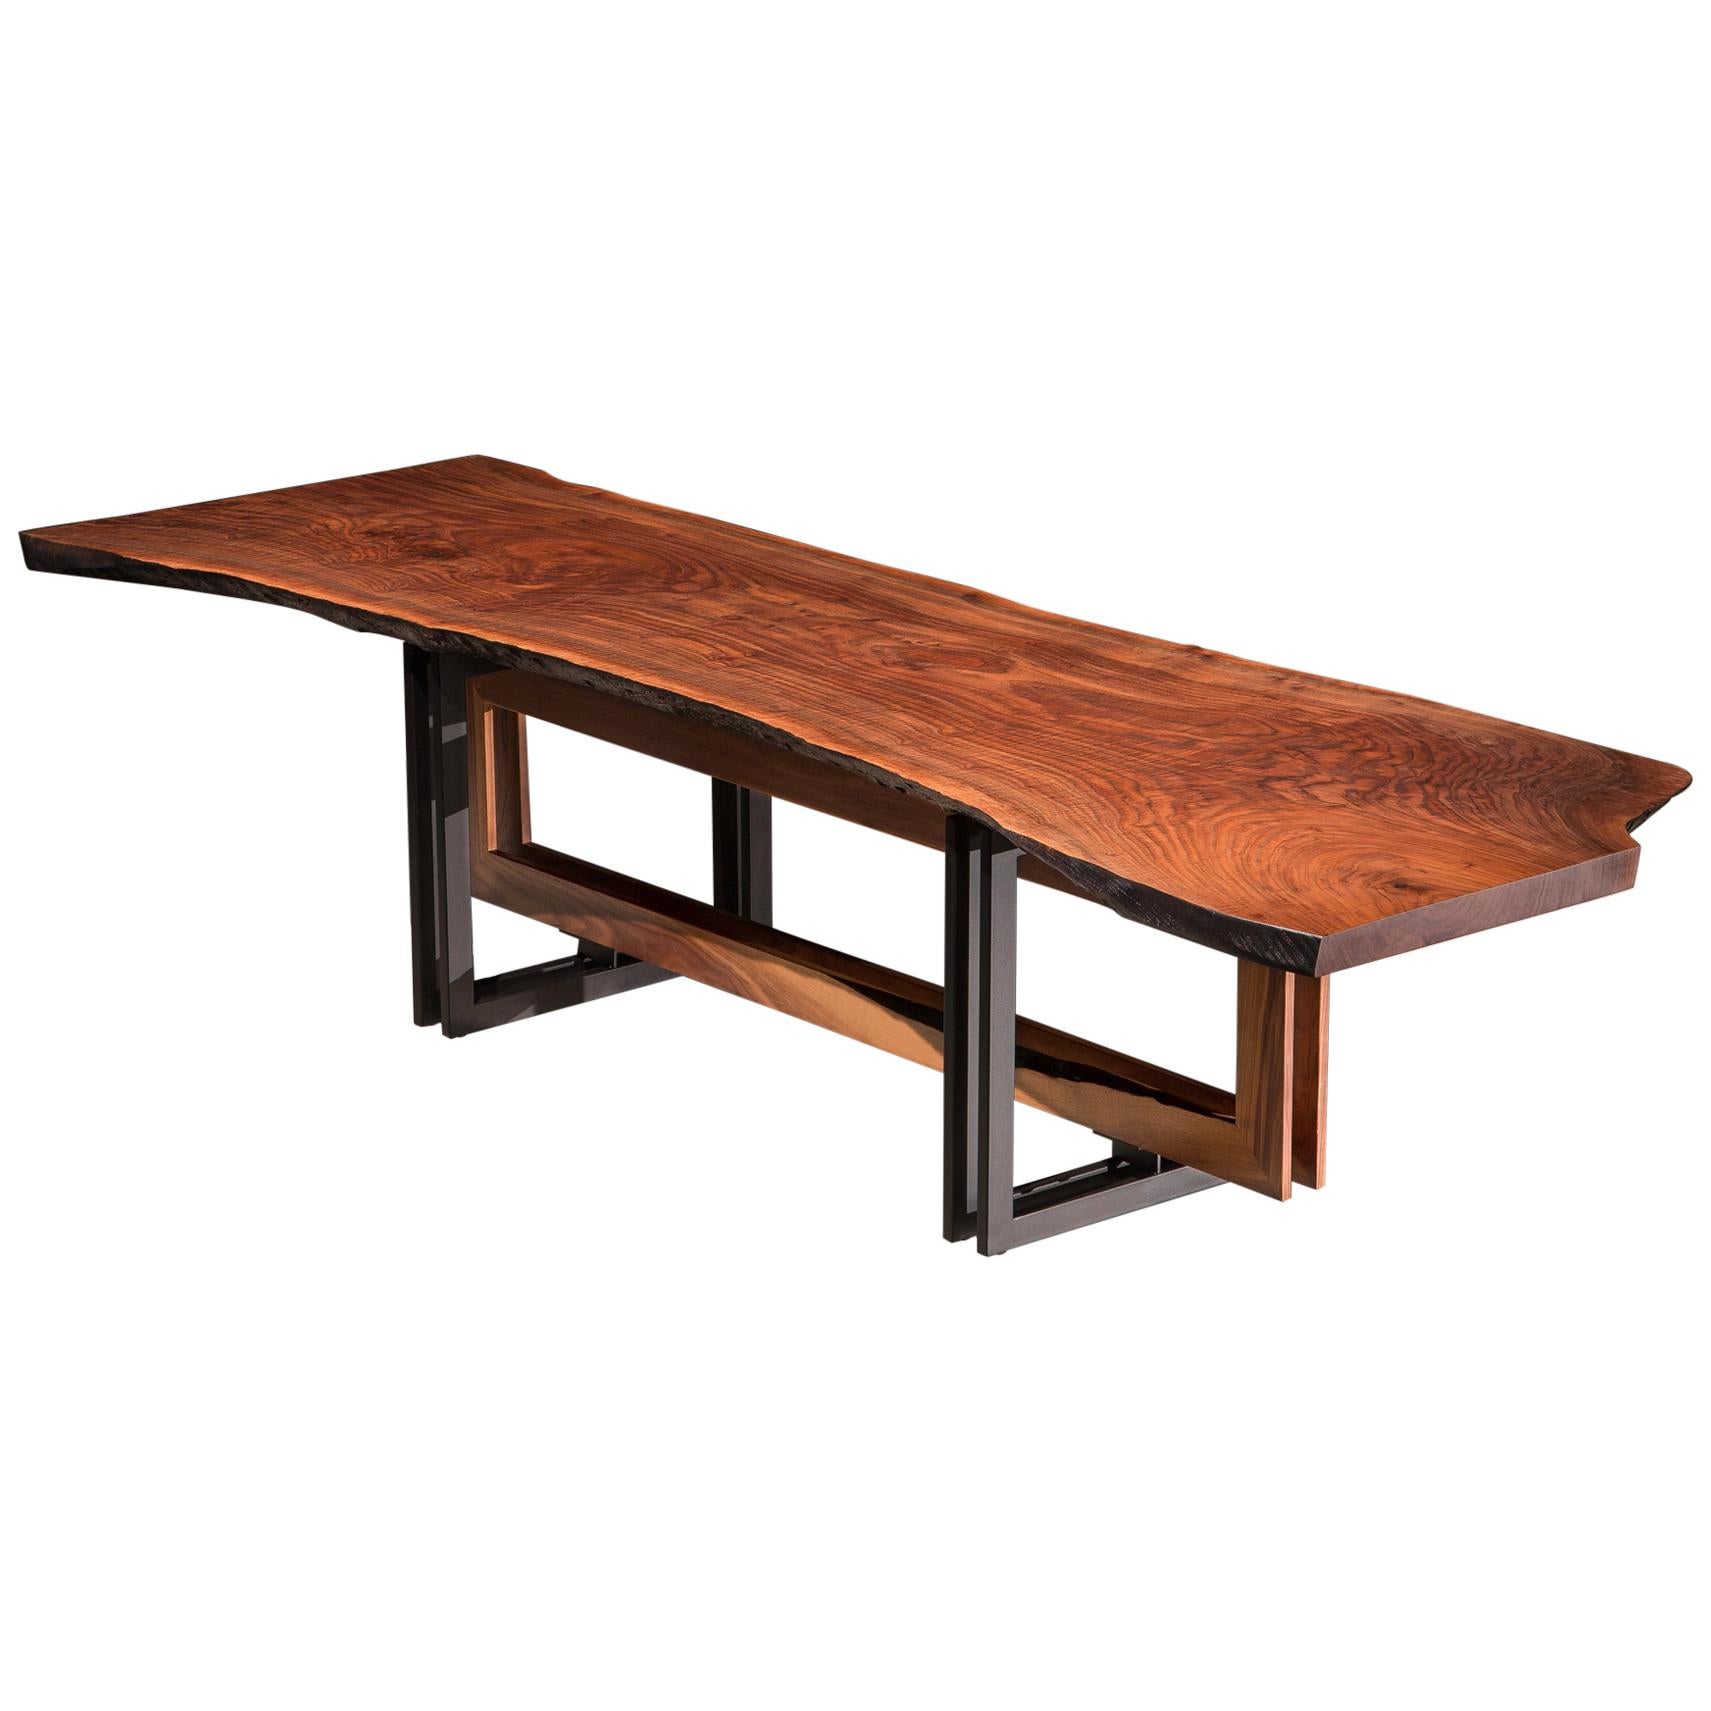 Live Edge Walnut Slab on Black Steel and Solid Walnut Base "Alter Dining Table" For Sale